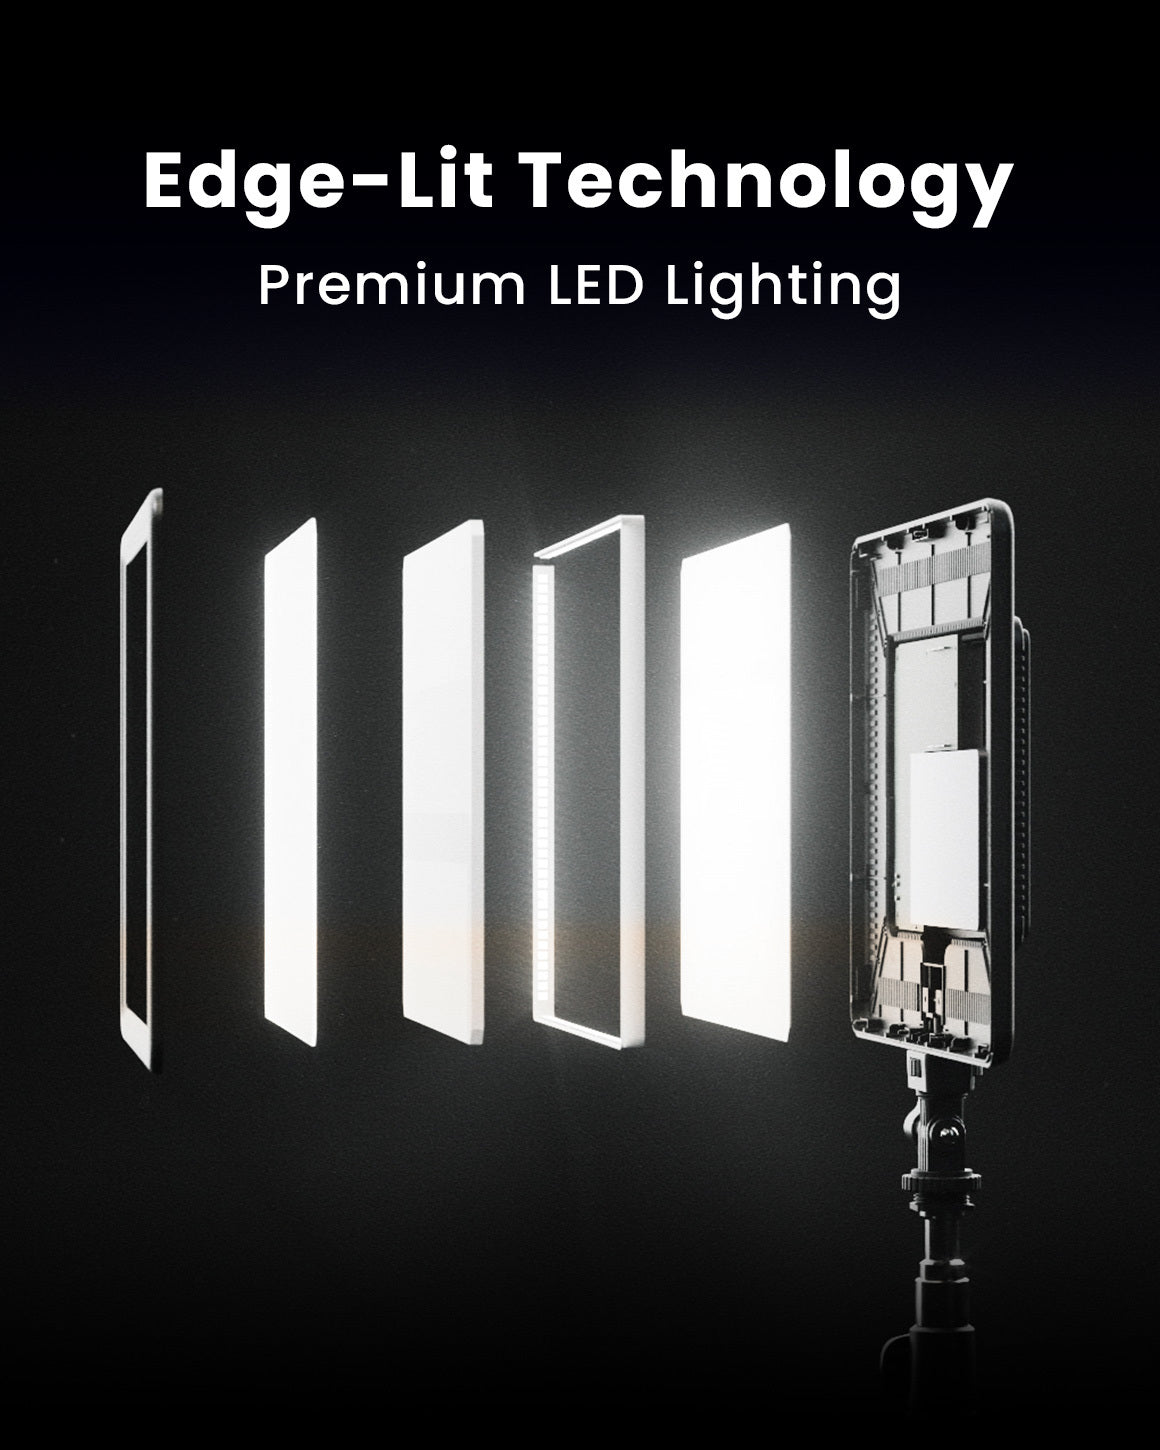 Edge-Lit Technology.  Premium LED Lighting.  Internal component layers of Lume Cube's edge-lit Studio Panel with inward-facing LEDs for gentle diffusion.